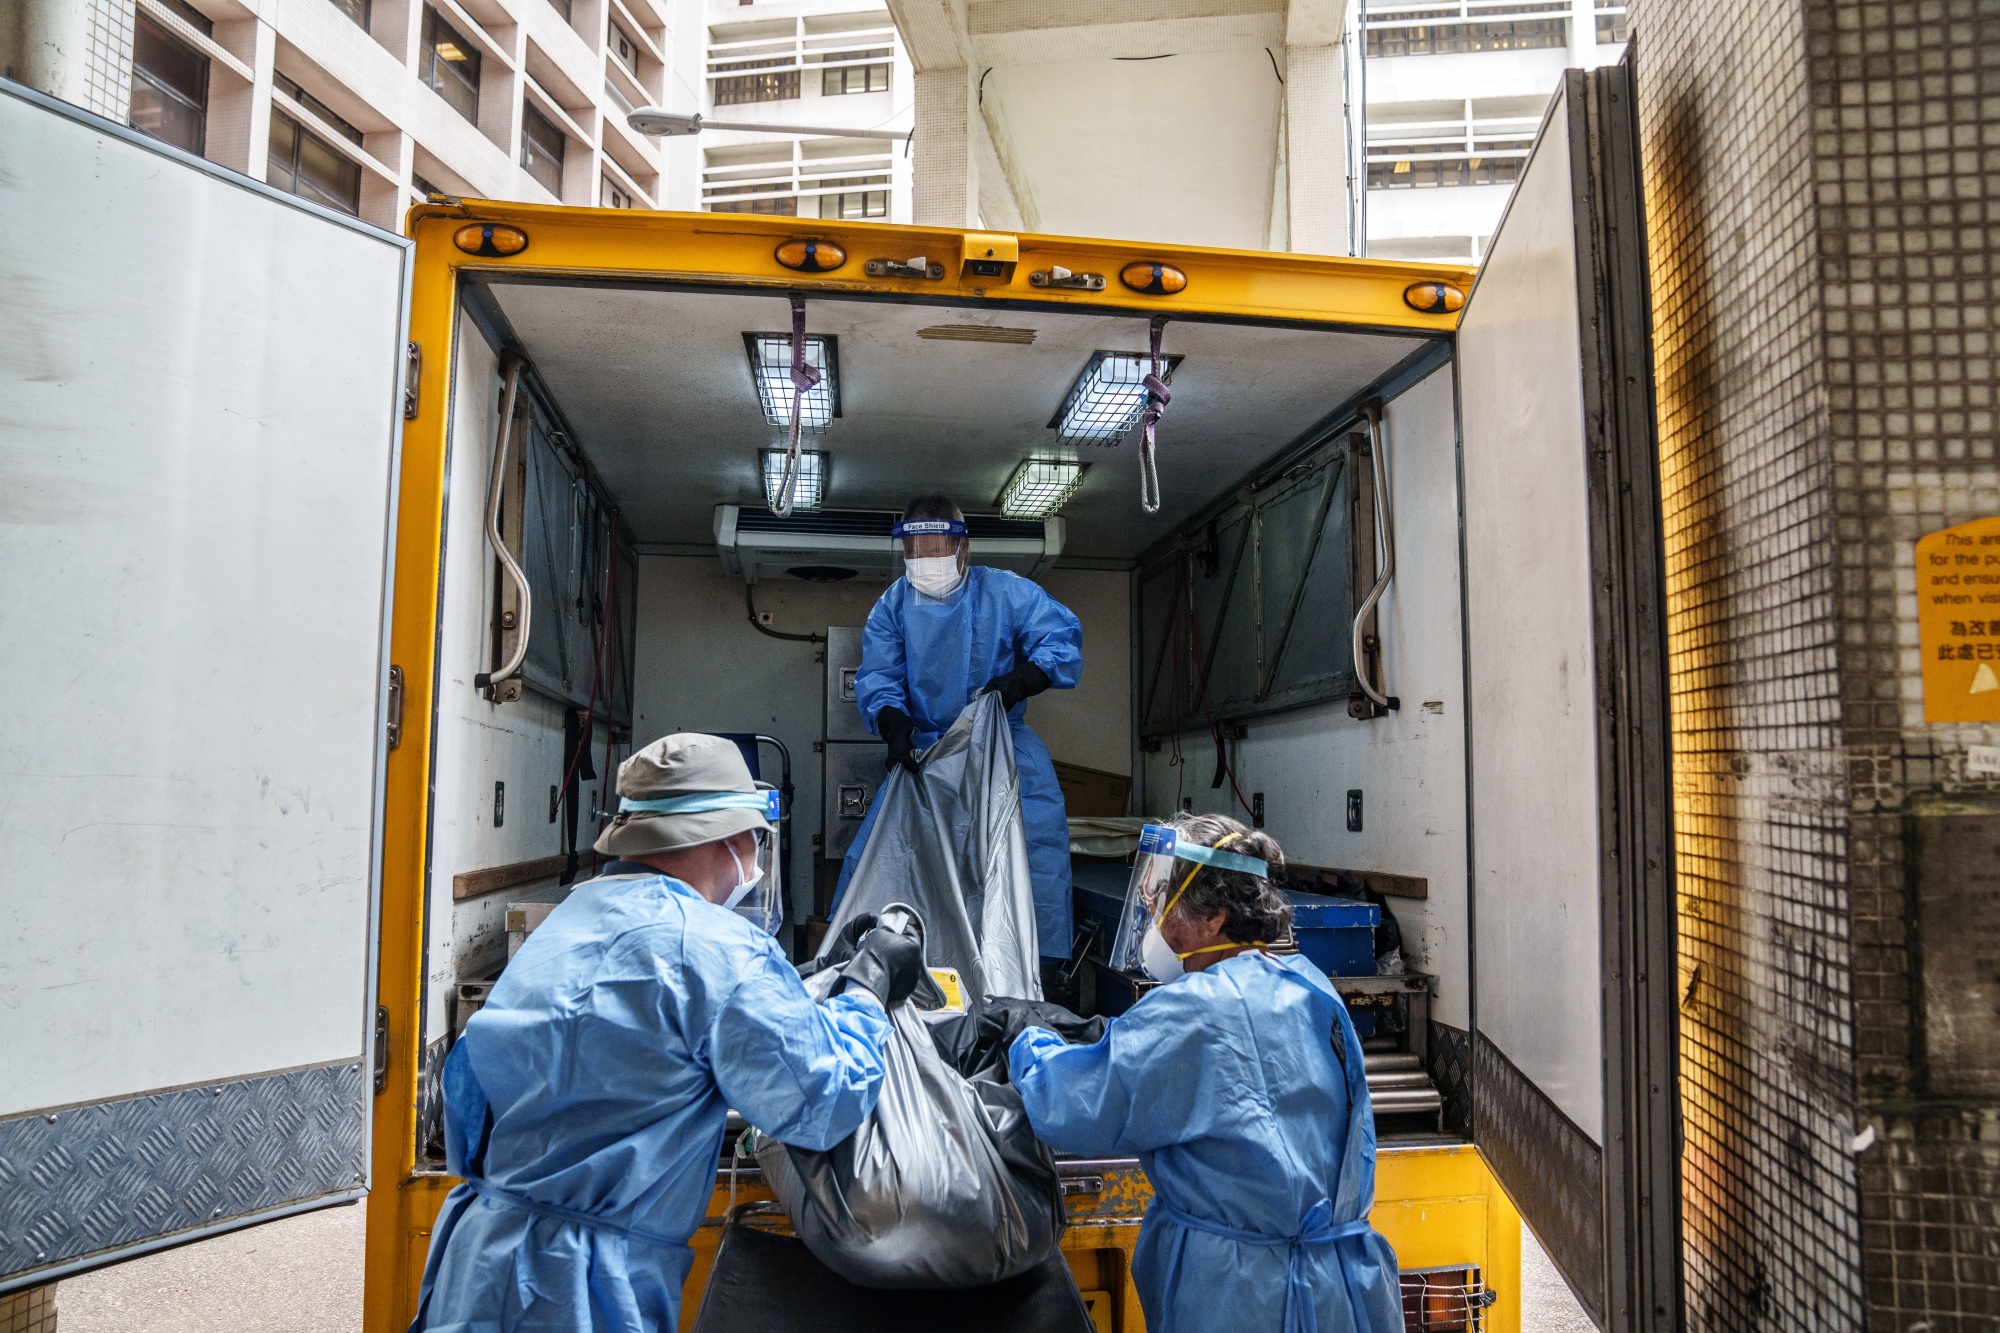 Healthcare workers move the body of a deceased patient at the Queen Elizabeth Hospital on March 2.